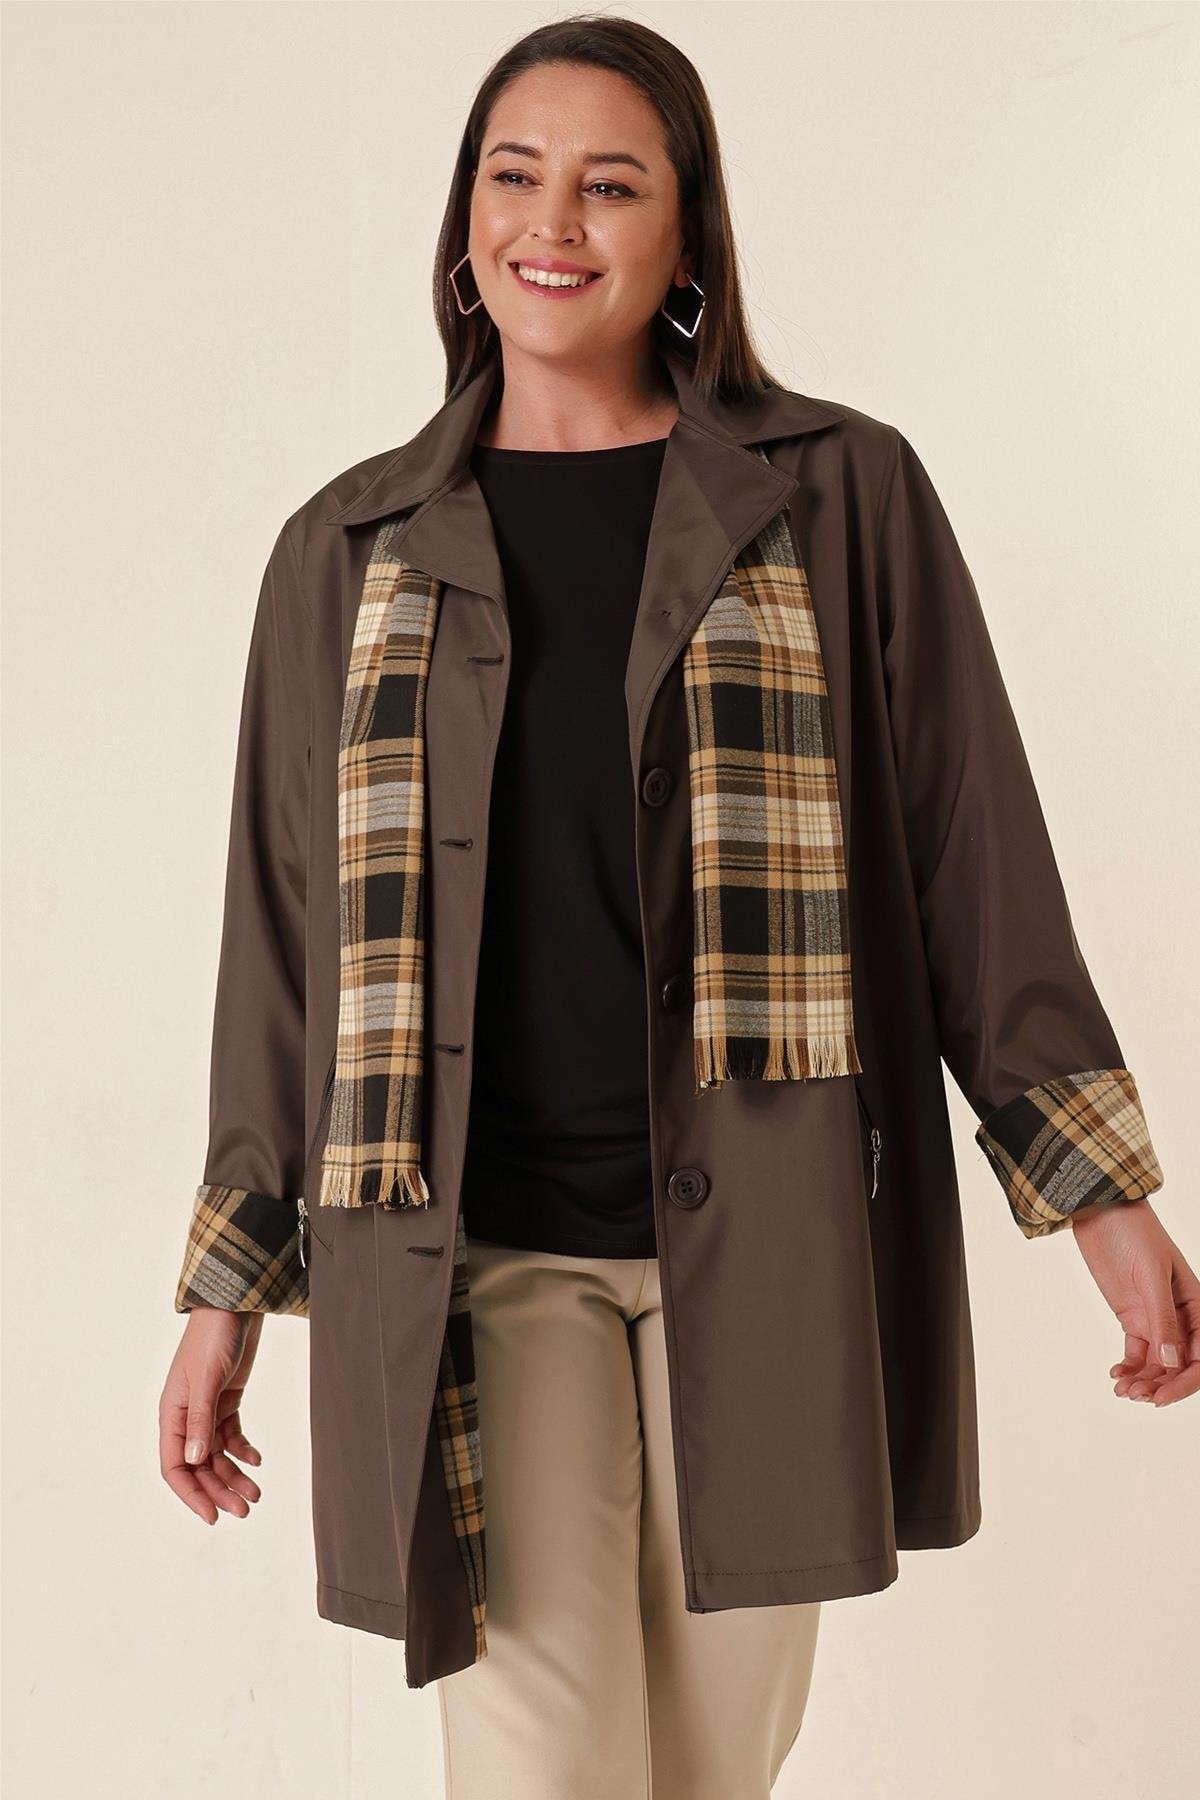 By Saygı Plus Size Bondit Coat with Lined Zipper Pocket and Scarf Accessory